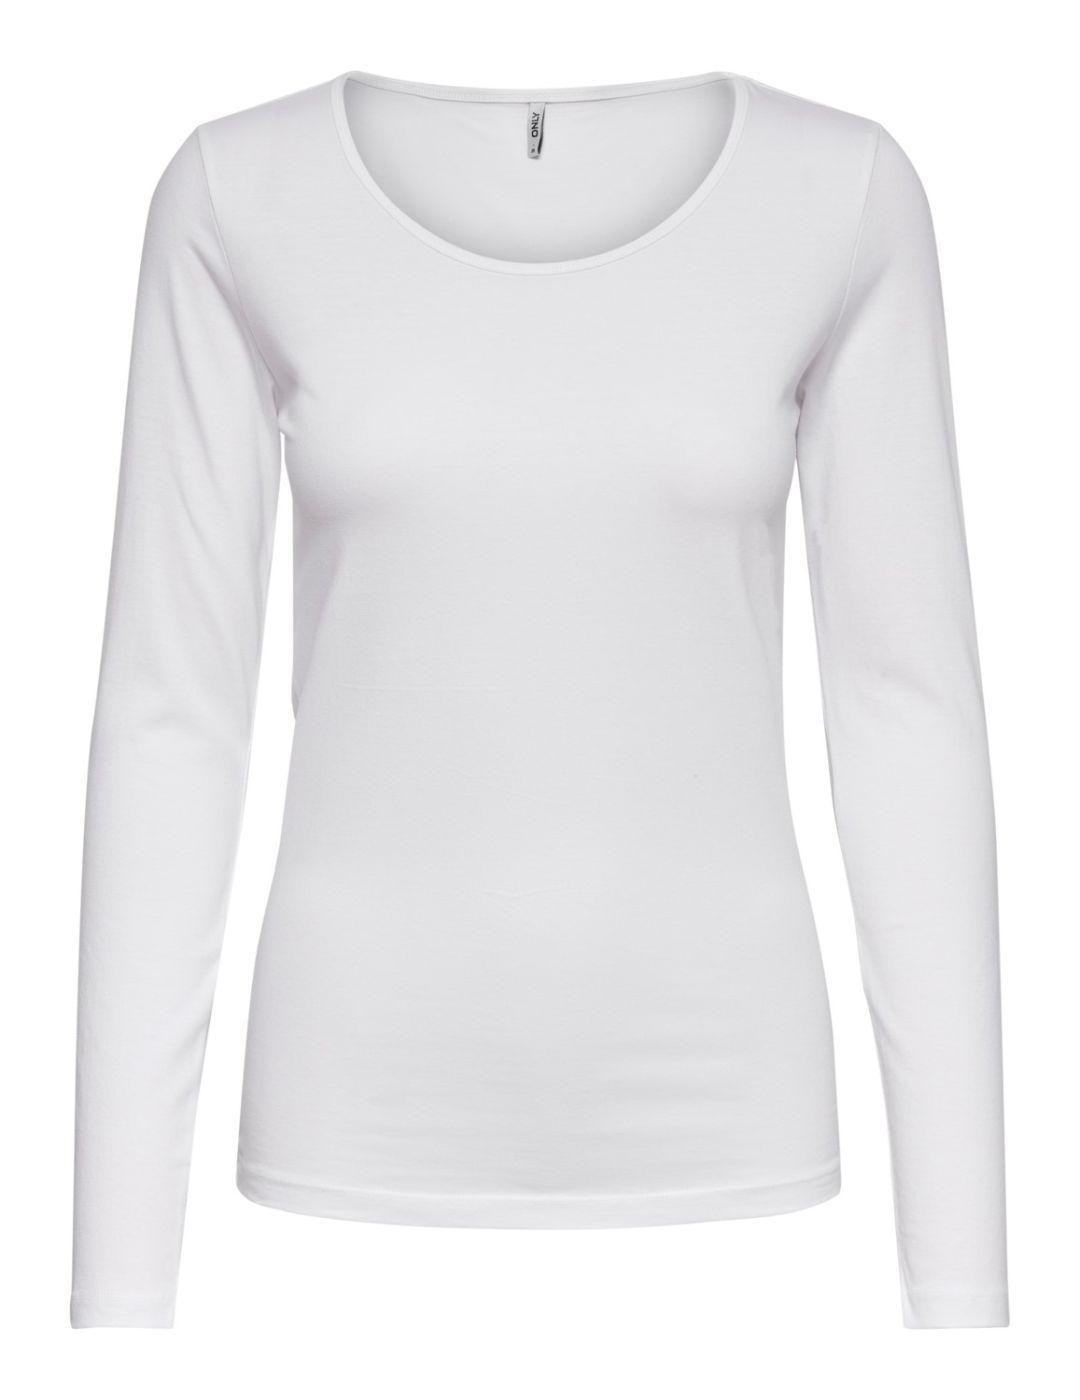 Camiseta Only Live Noos m/l blanca para mujer -a